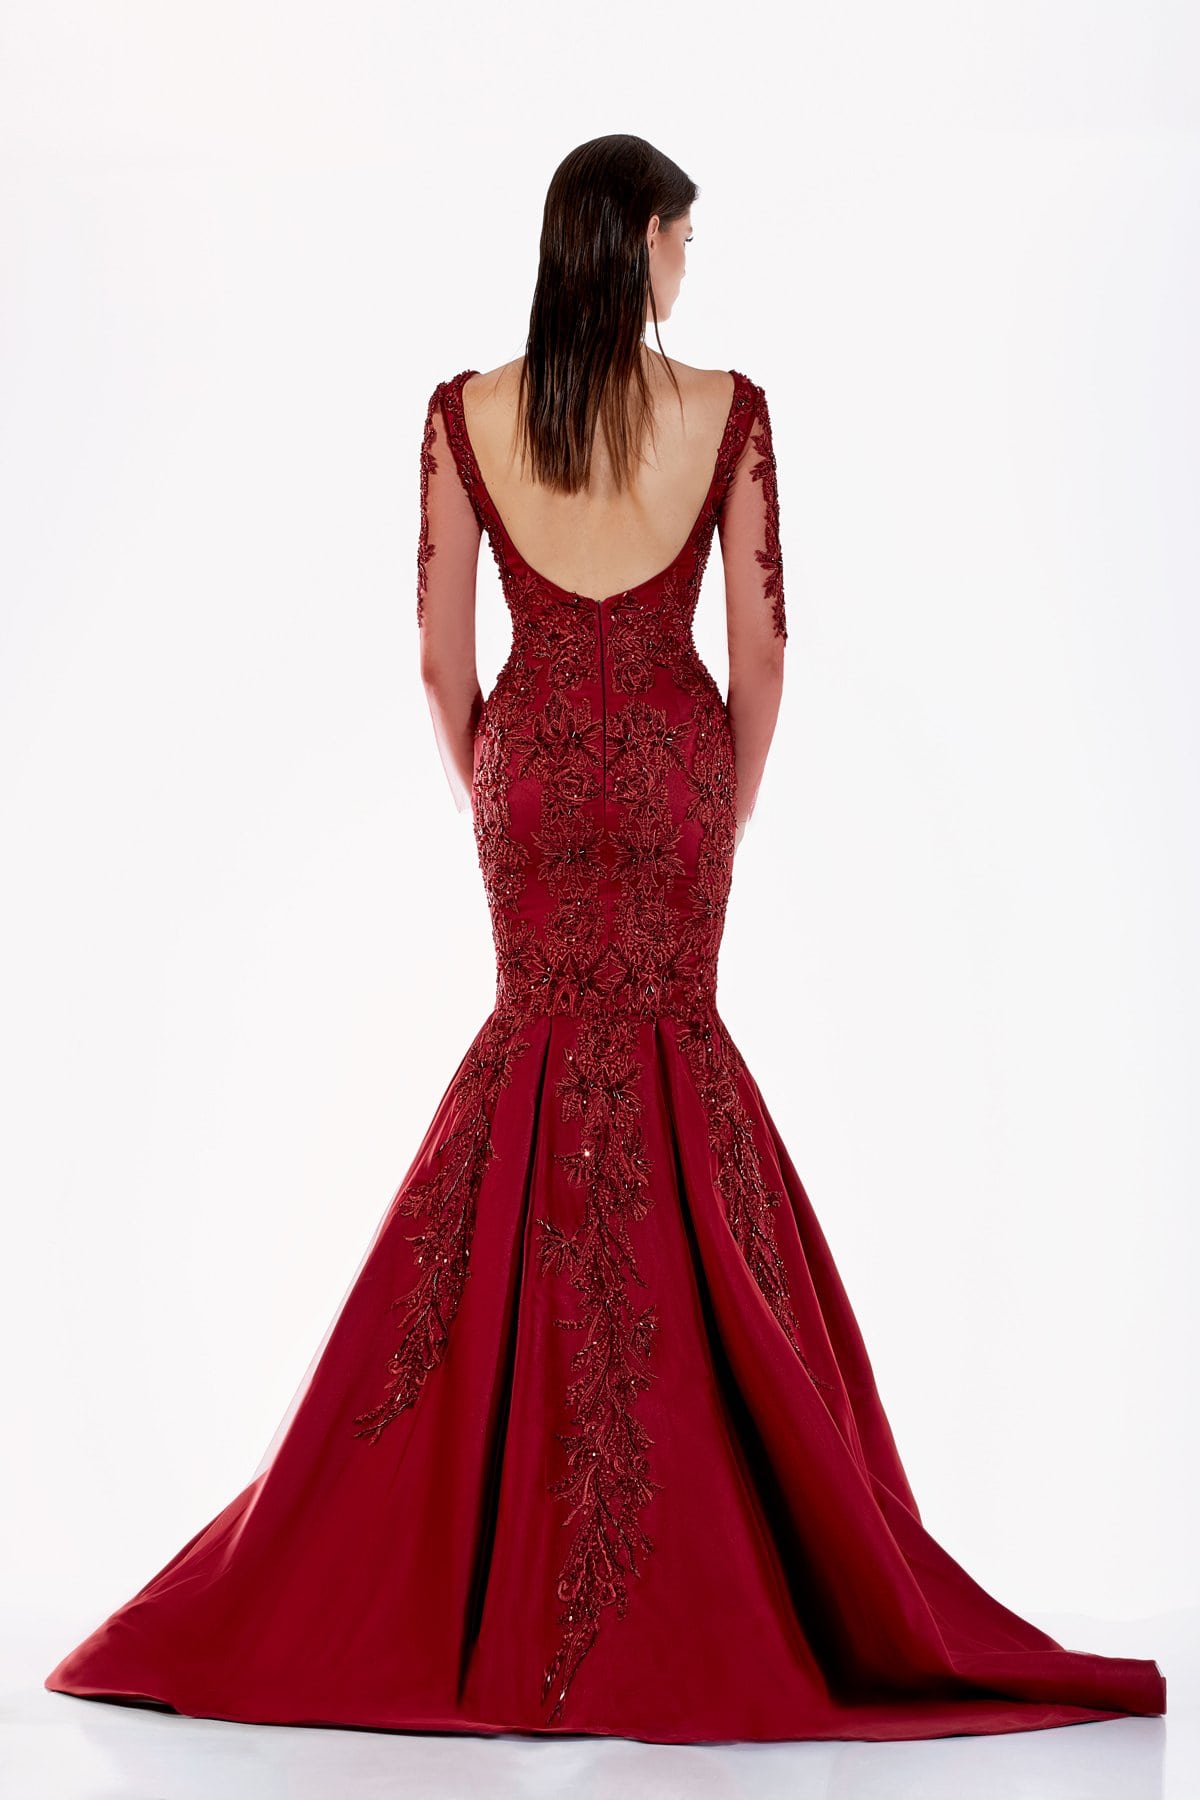 Back view of Azzure Couture FM3005 Hot Red Sexy Long Sleeve Dress on model - Rofial Beauty